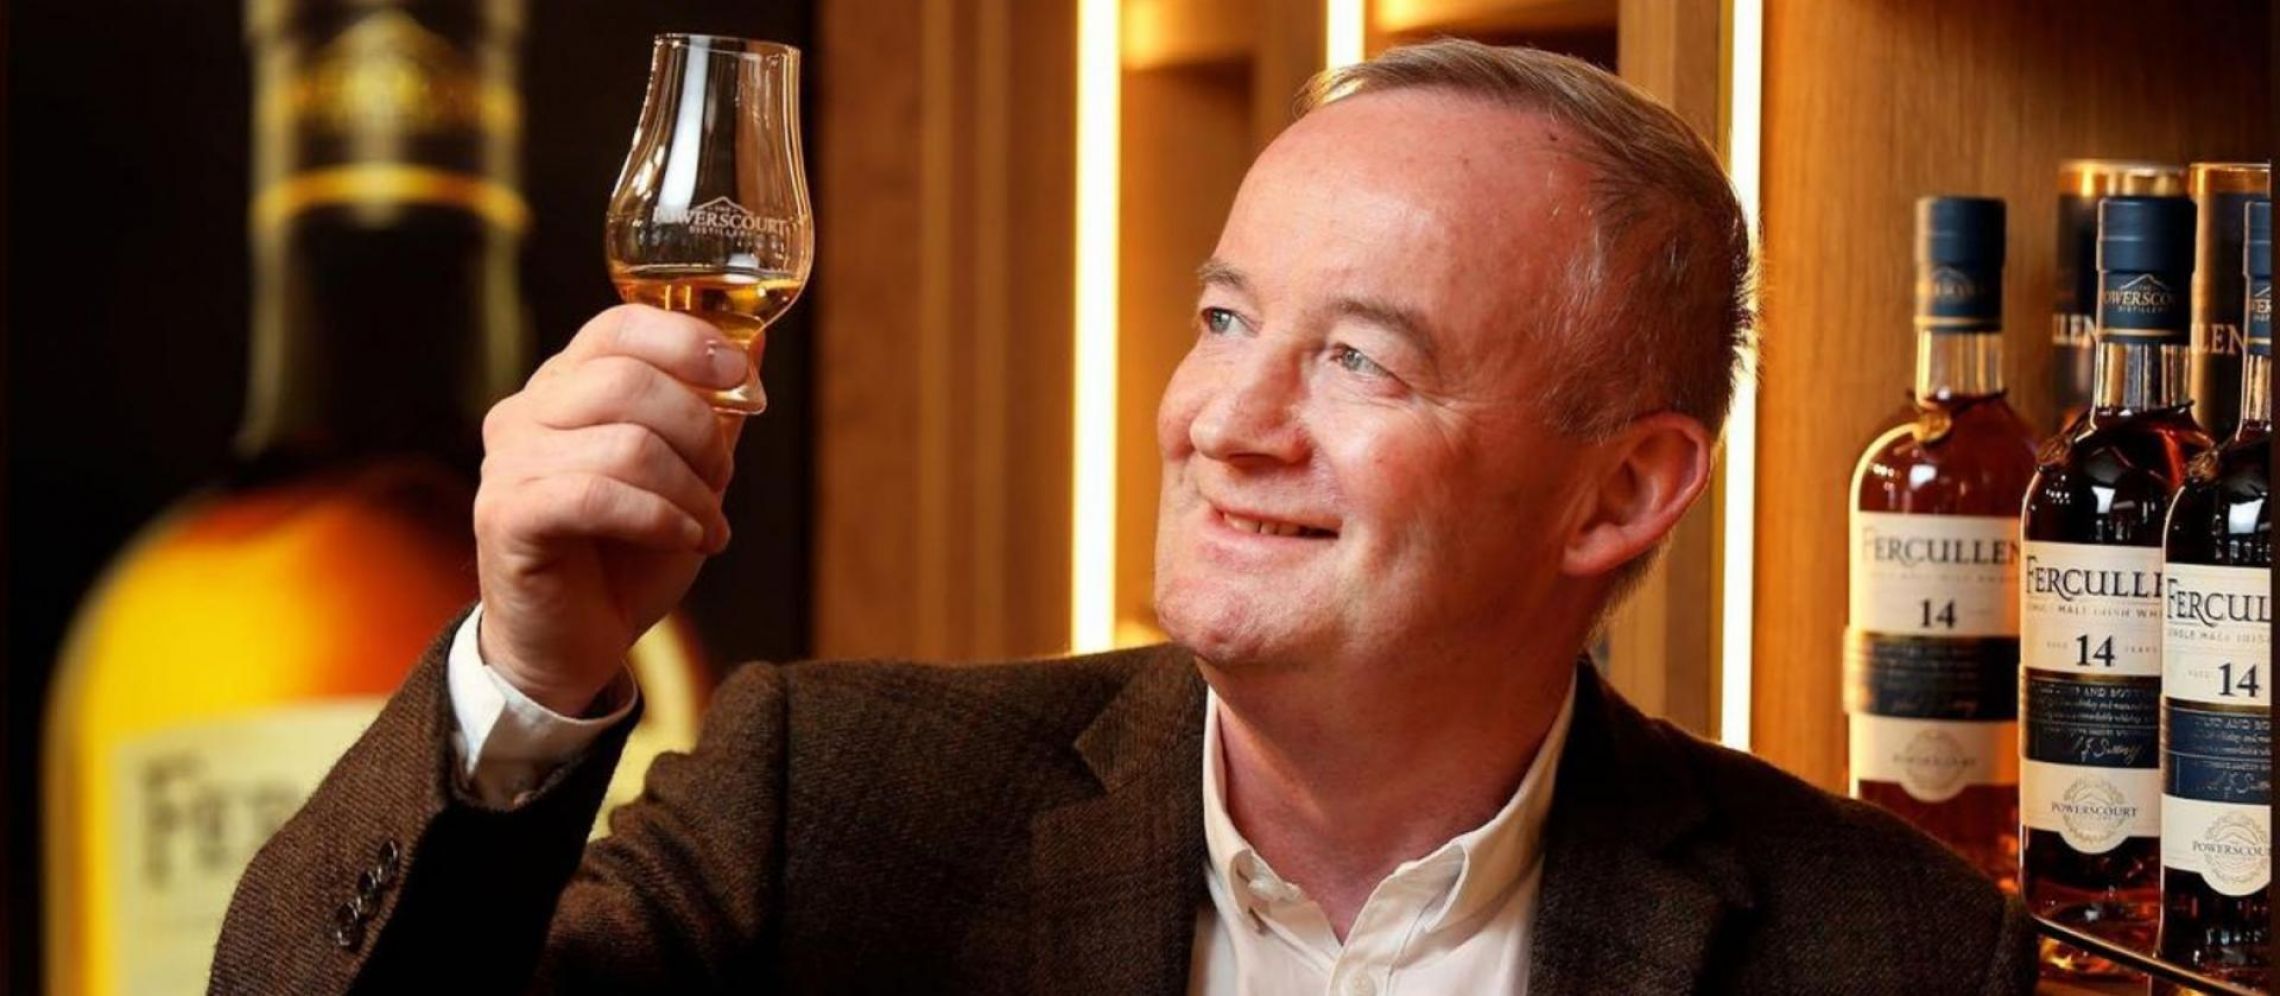 Photo for: A Chat With Noel Sweeney, Master Distiller for Powerscourt Distillery Ltd.